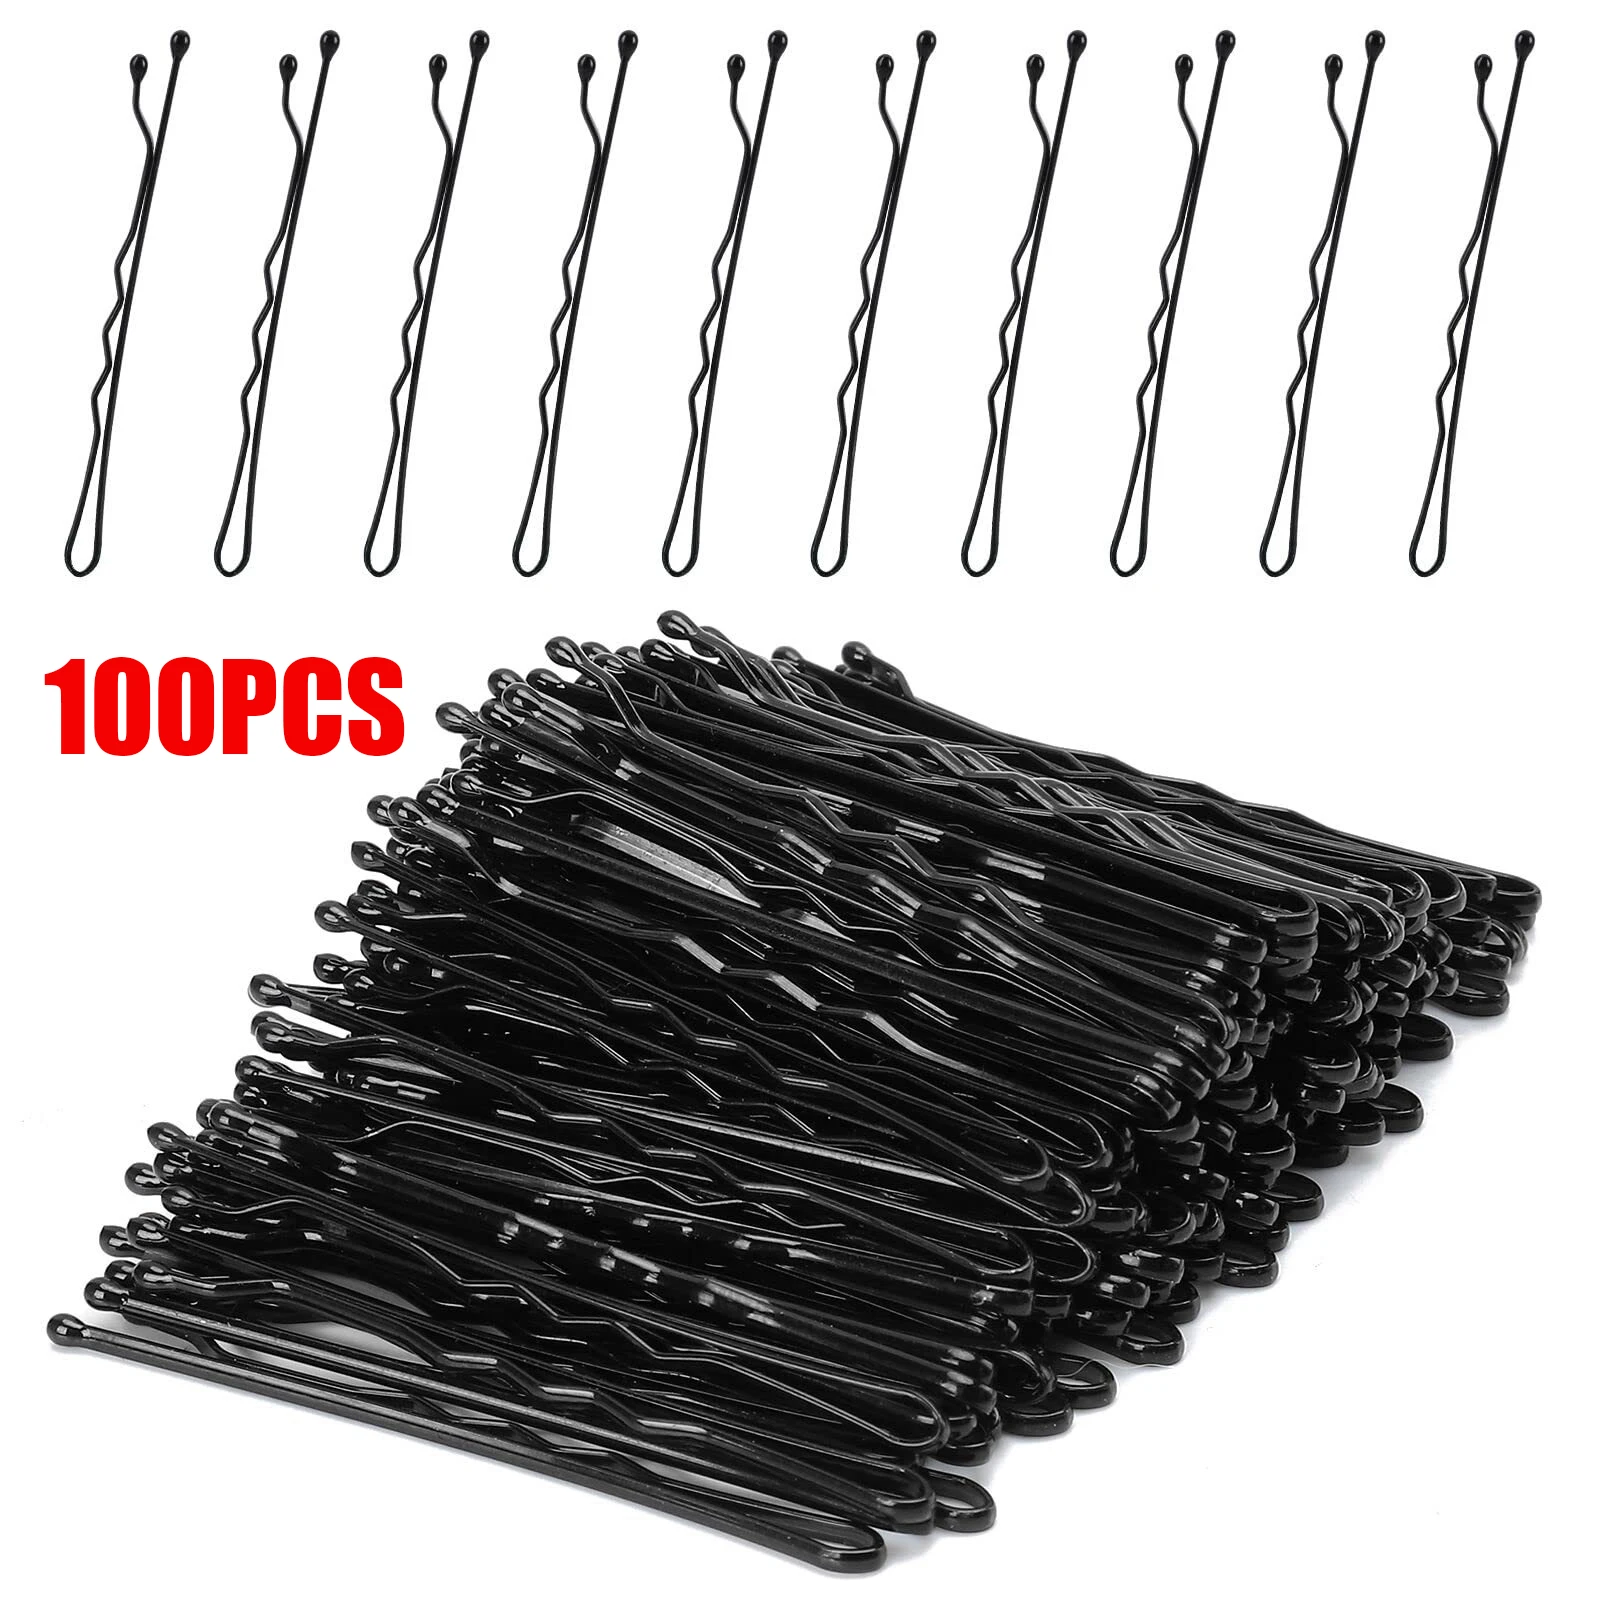 100PCS Brown Hair Pins black Hairpins Invisible Wave Hairgrip Barrette Hairclip Bulk Hair Accessories for Women Lady Girls Kids 12pcs new white black brown jewelry packaging box kraft paper favour bulk gift display boxes bag necklace bracelet box